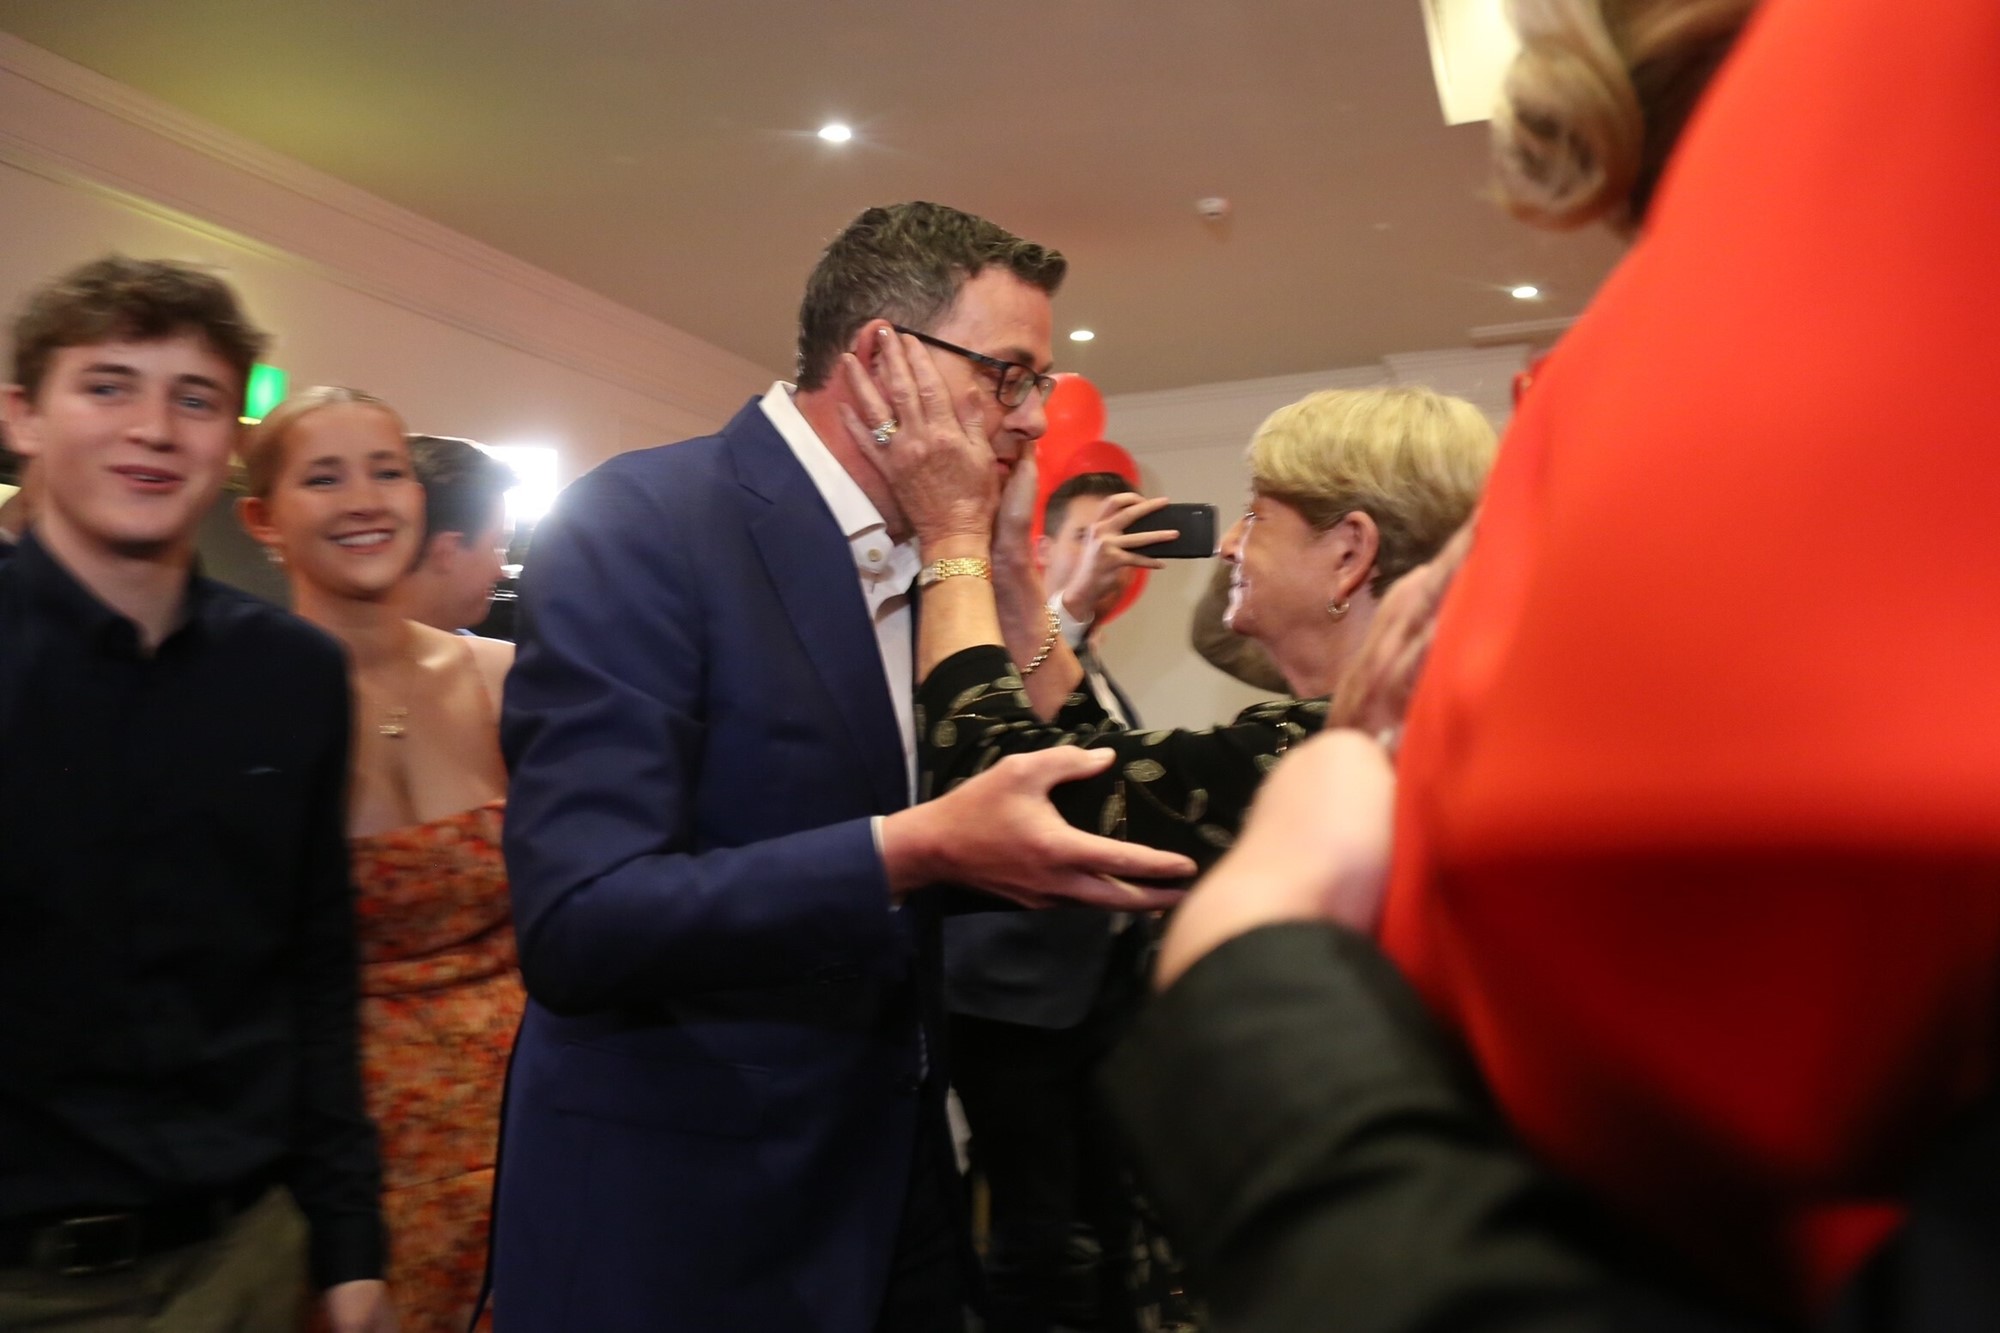 A relative holds Daniel Andrews's face in her hands.